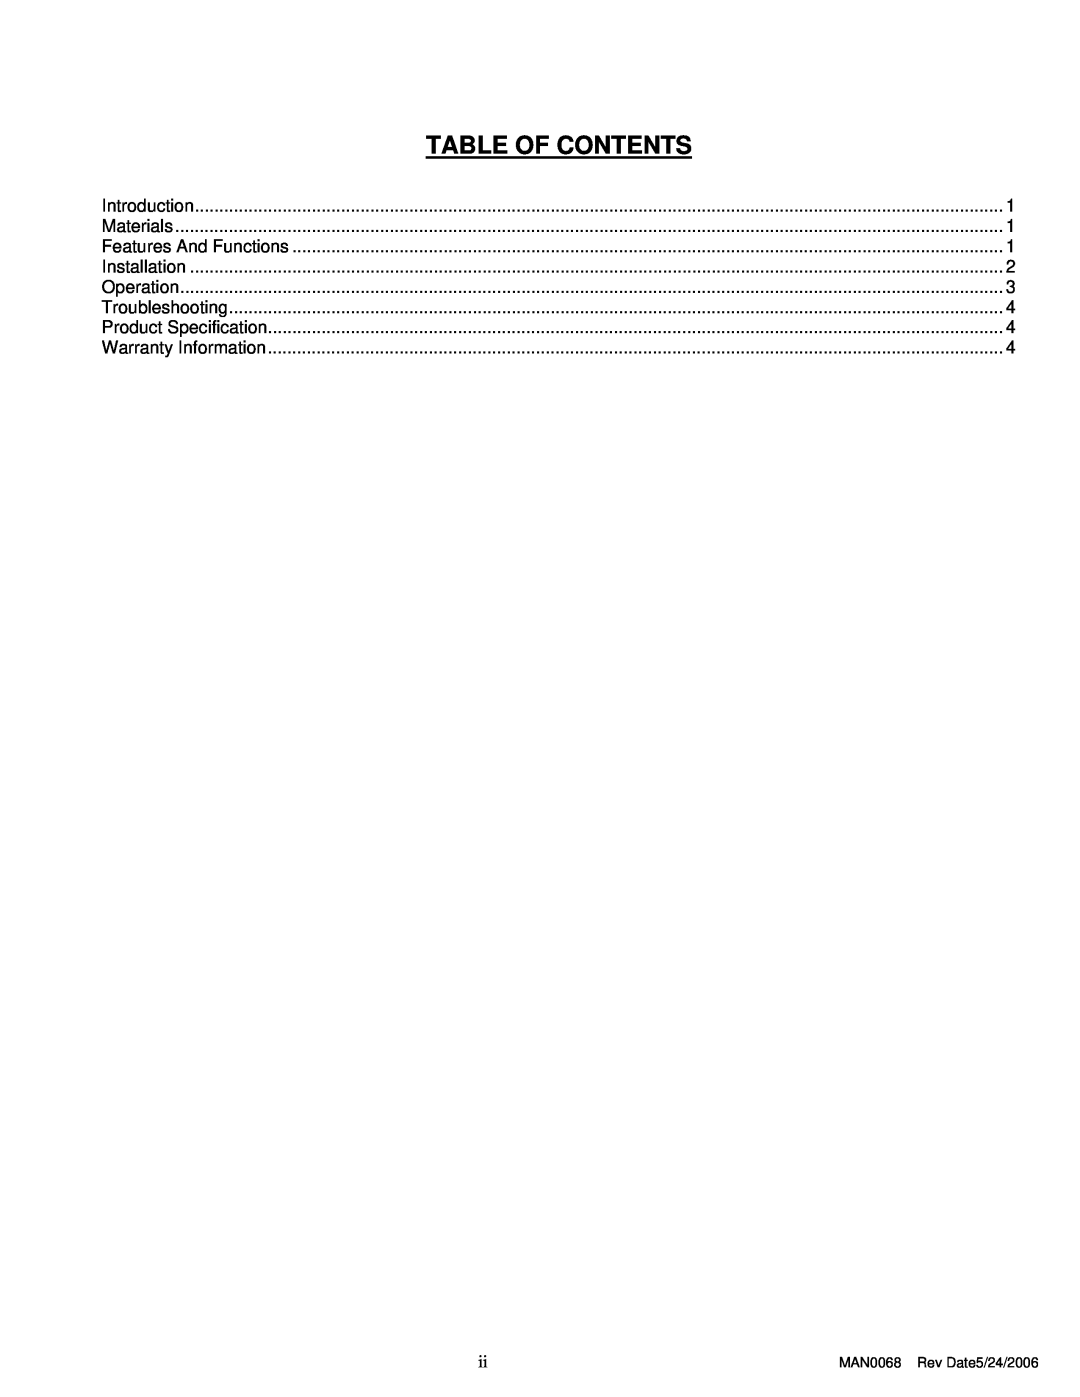 Network Technologies SE-DVI-2 Table Of Contents, MAN0068 Rev Date5/24/2006, Introduction, Materials, Installation 